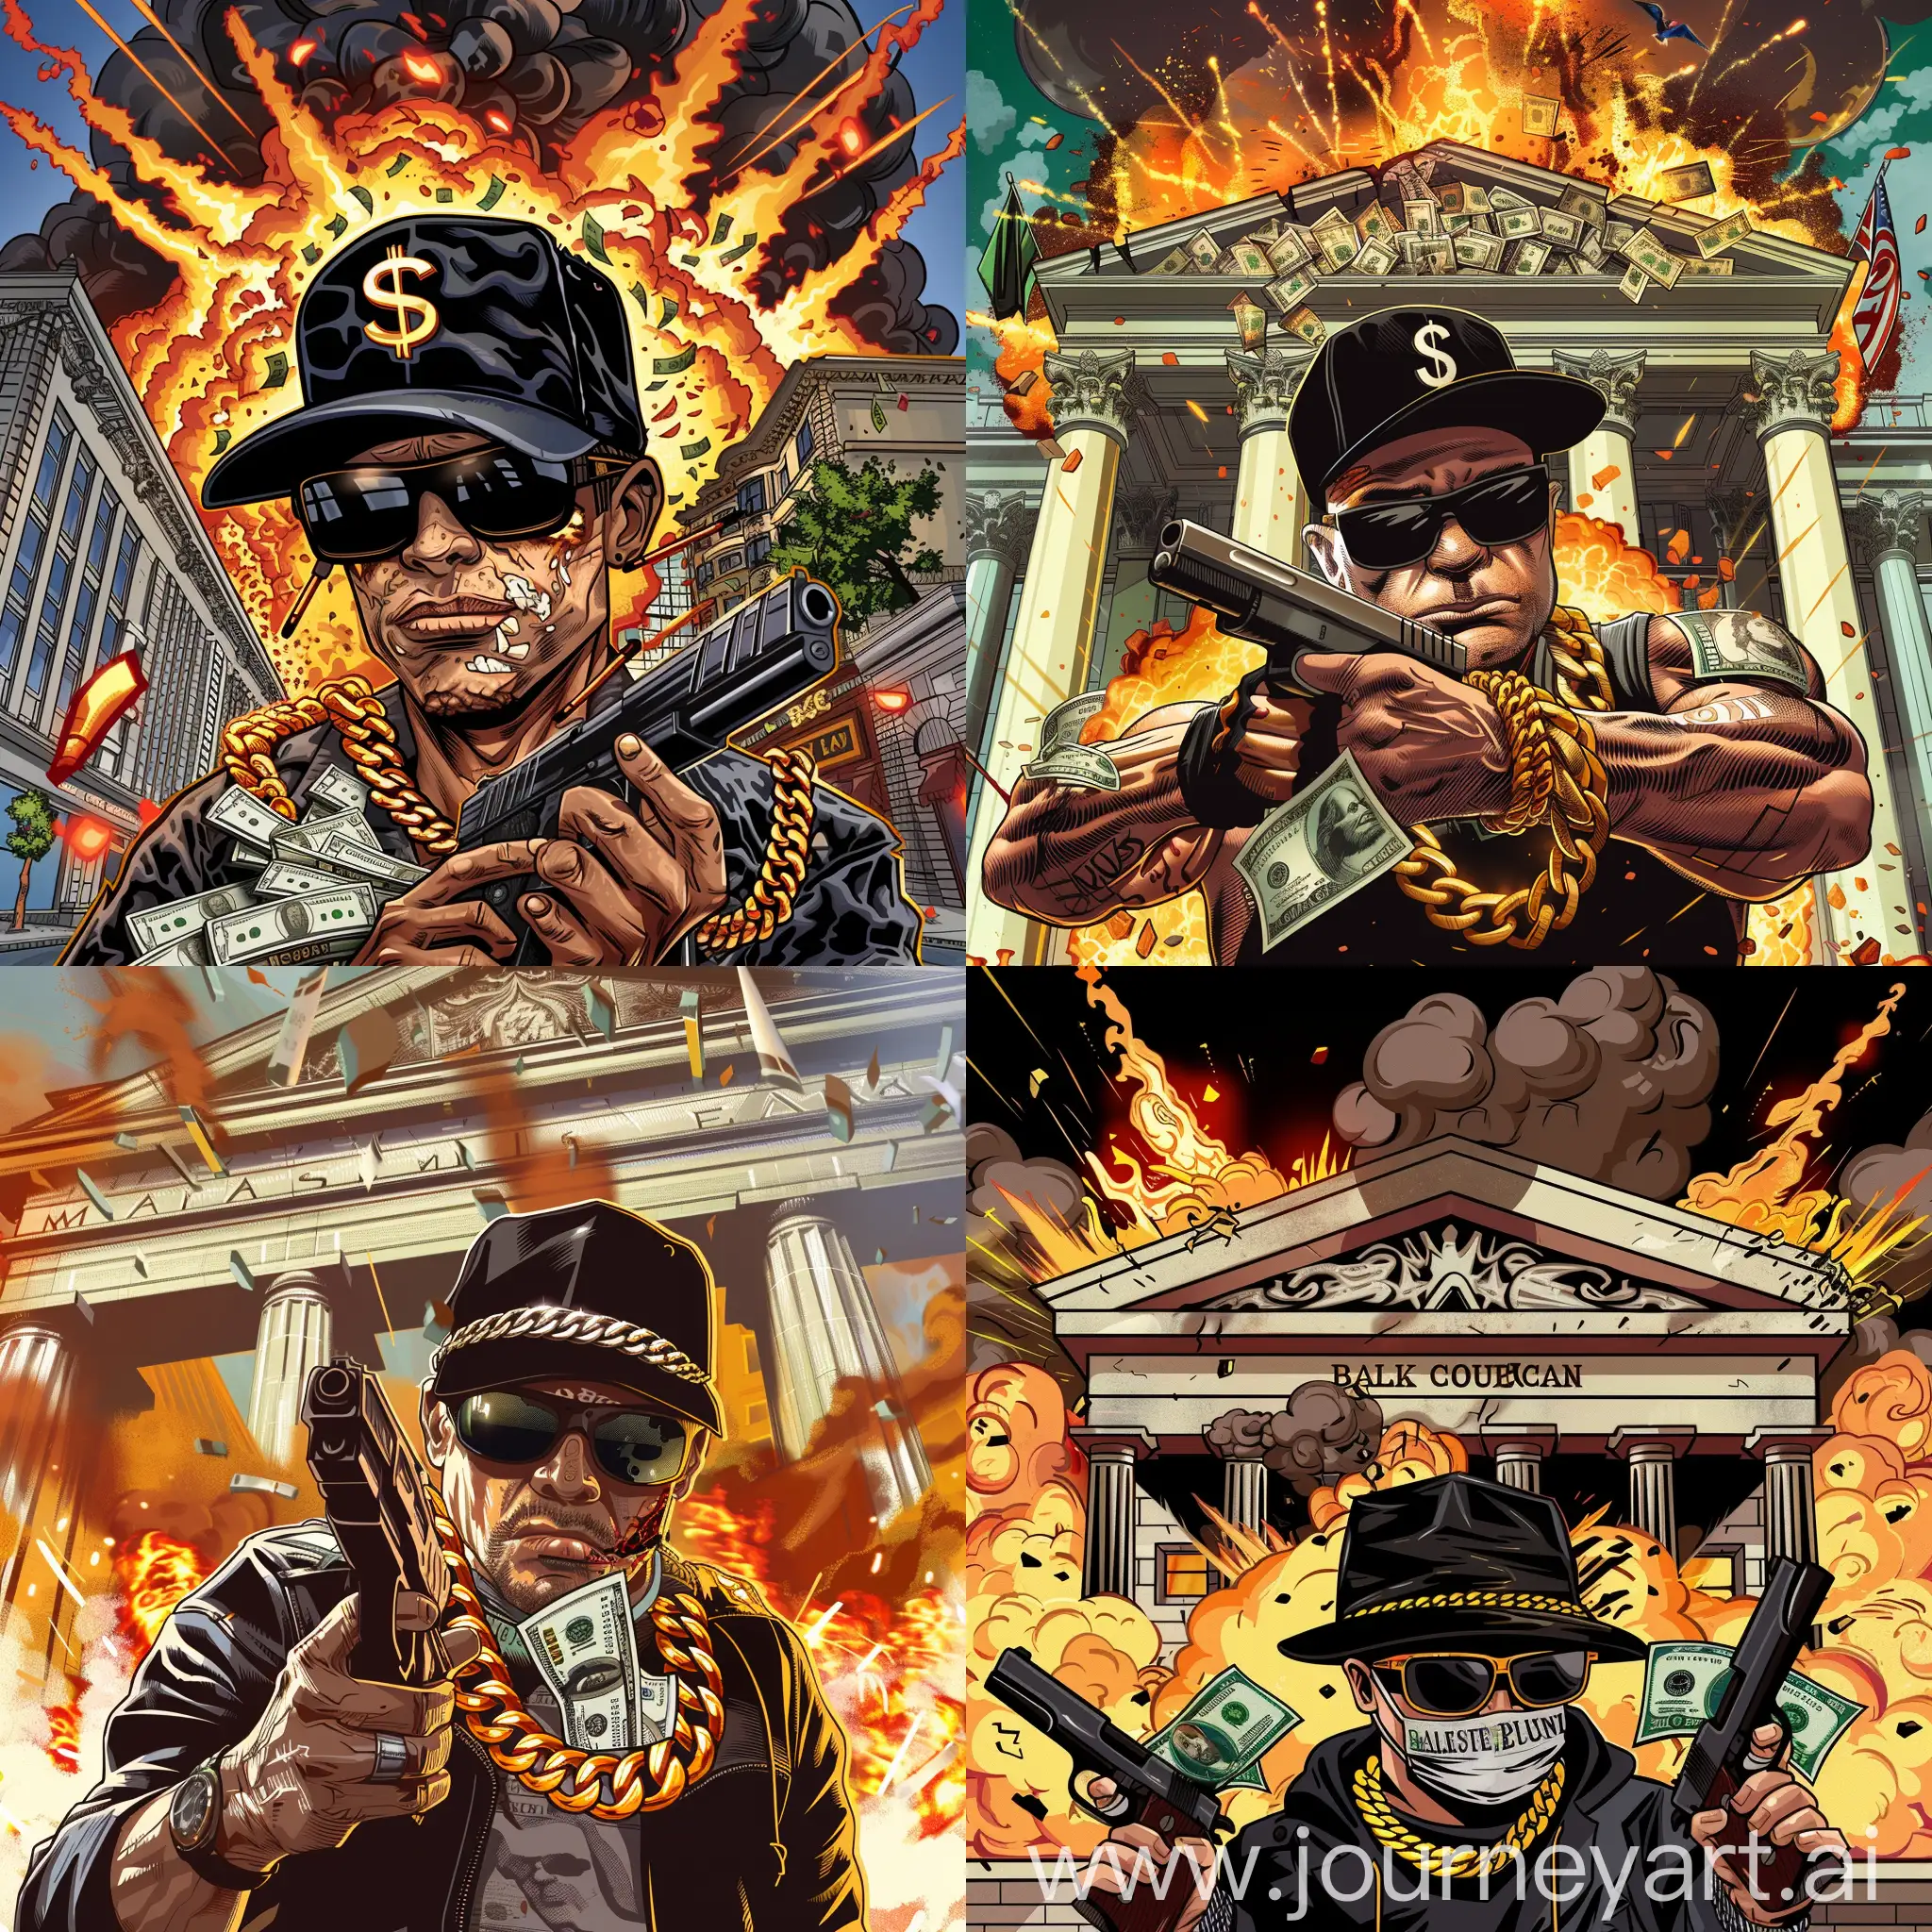 a gangster with a gun in his hands and money in a black cap behind a bank explosion and wearing sunglasses and a gold chain around his neck with a dollar